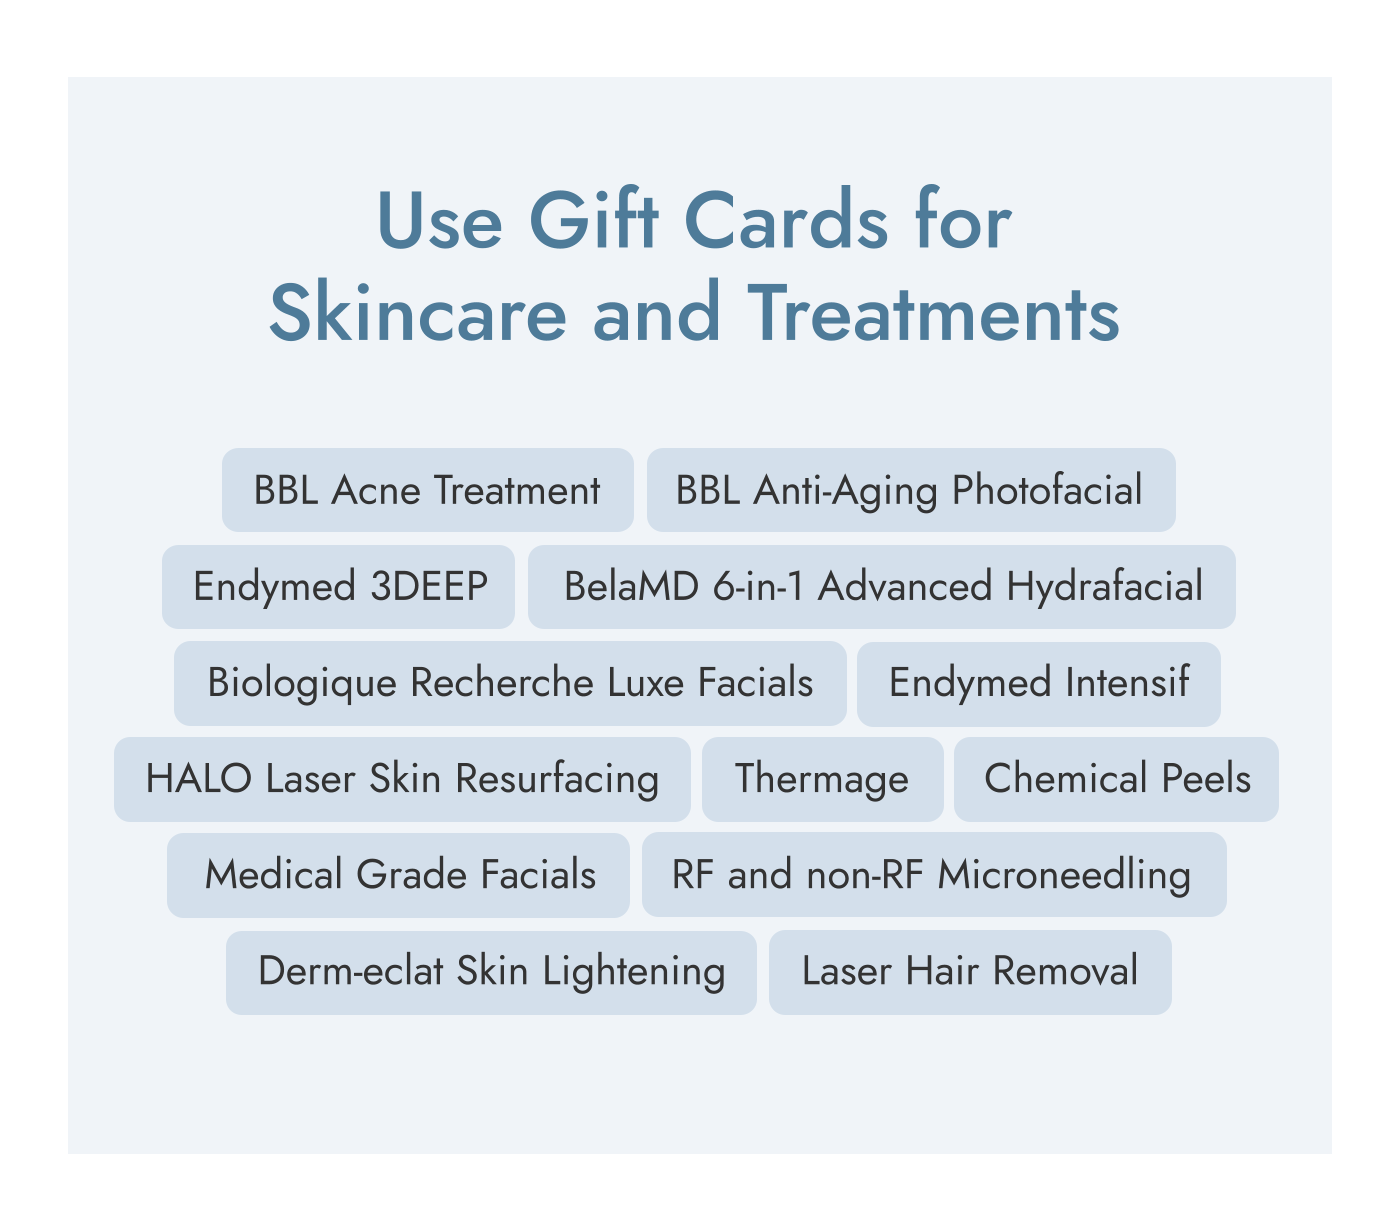 Save 10% off BBL acne treatment, anti-aging photofacial, biologique recherce luxe facials, endymed intensif, endymed 3DEEP, RF and non-RF microneedling, laser hair removal